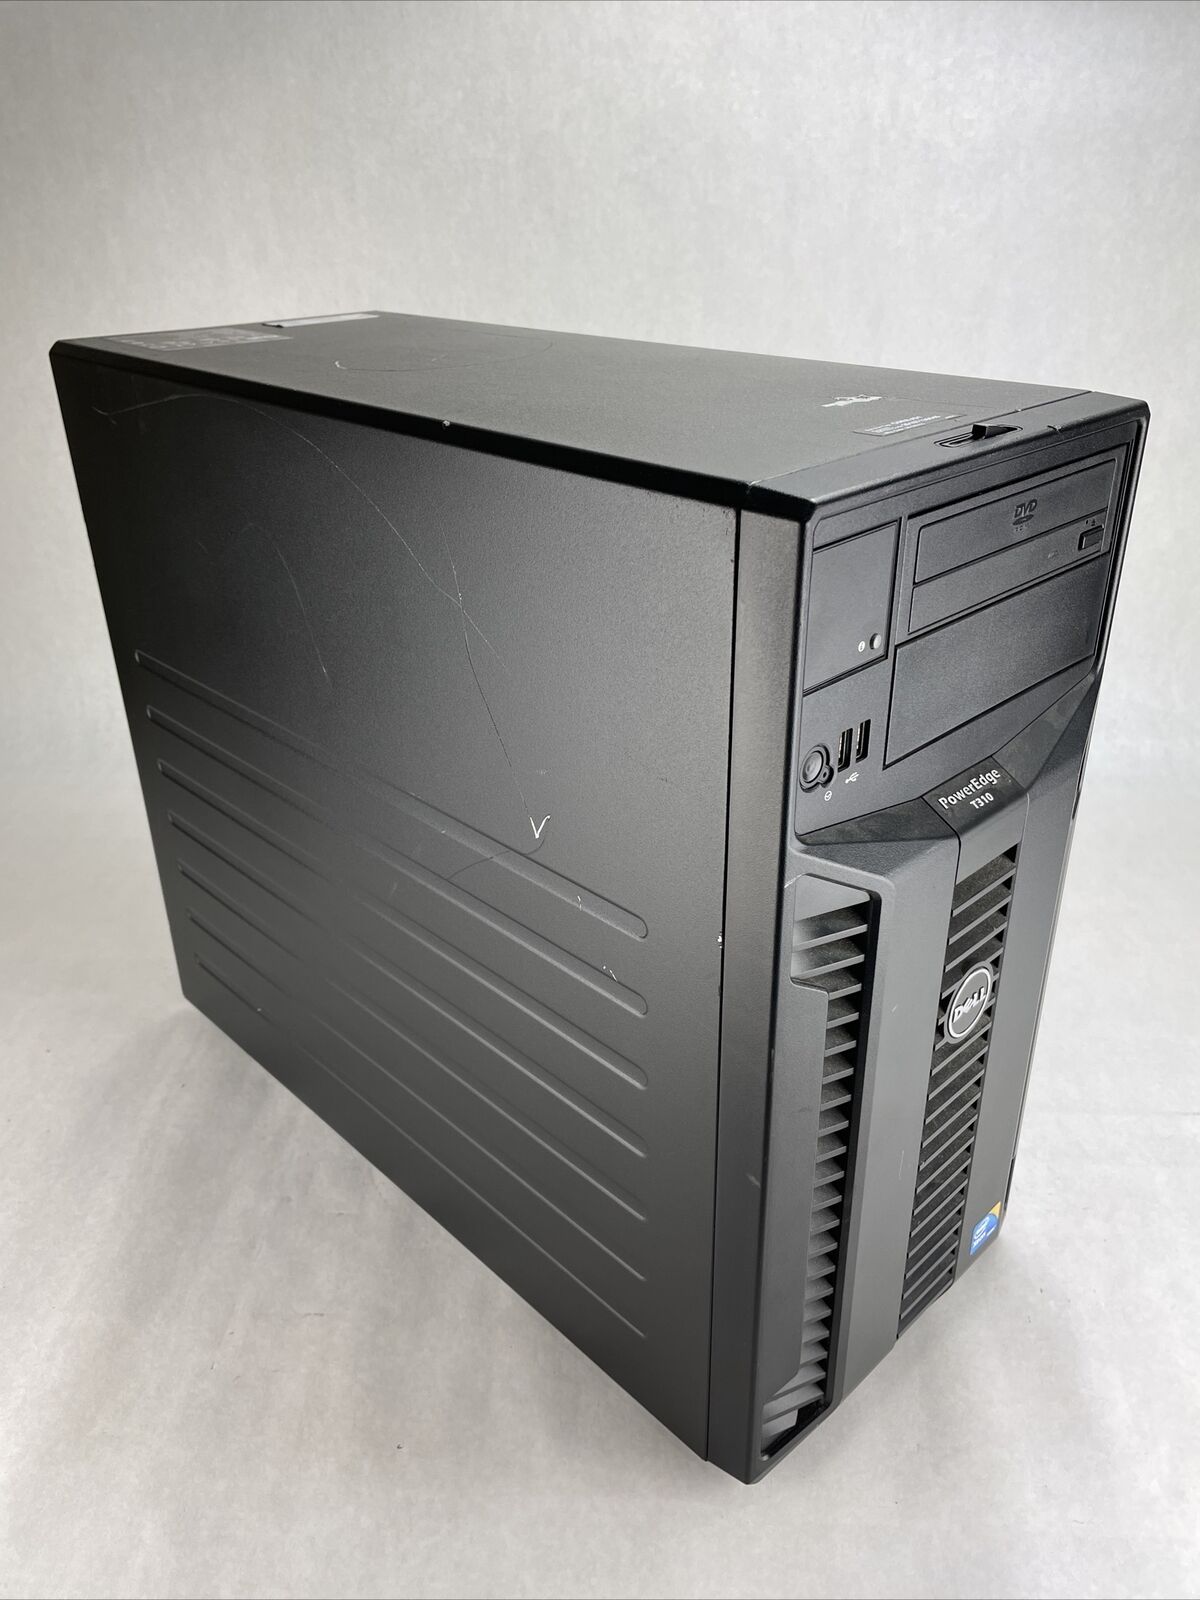 Dell Poweredge T310 Tower Server Intel X3470 2.93GHz 4GB RAM No HDD No OS